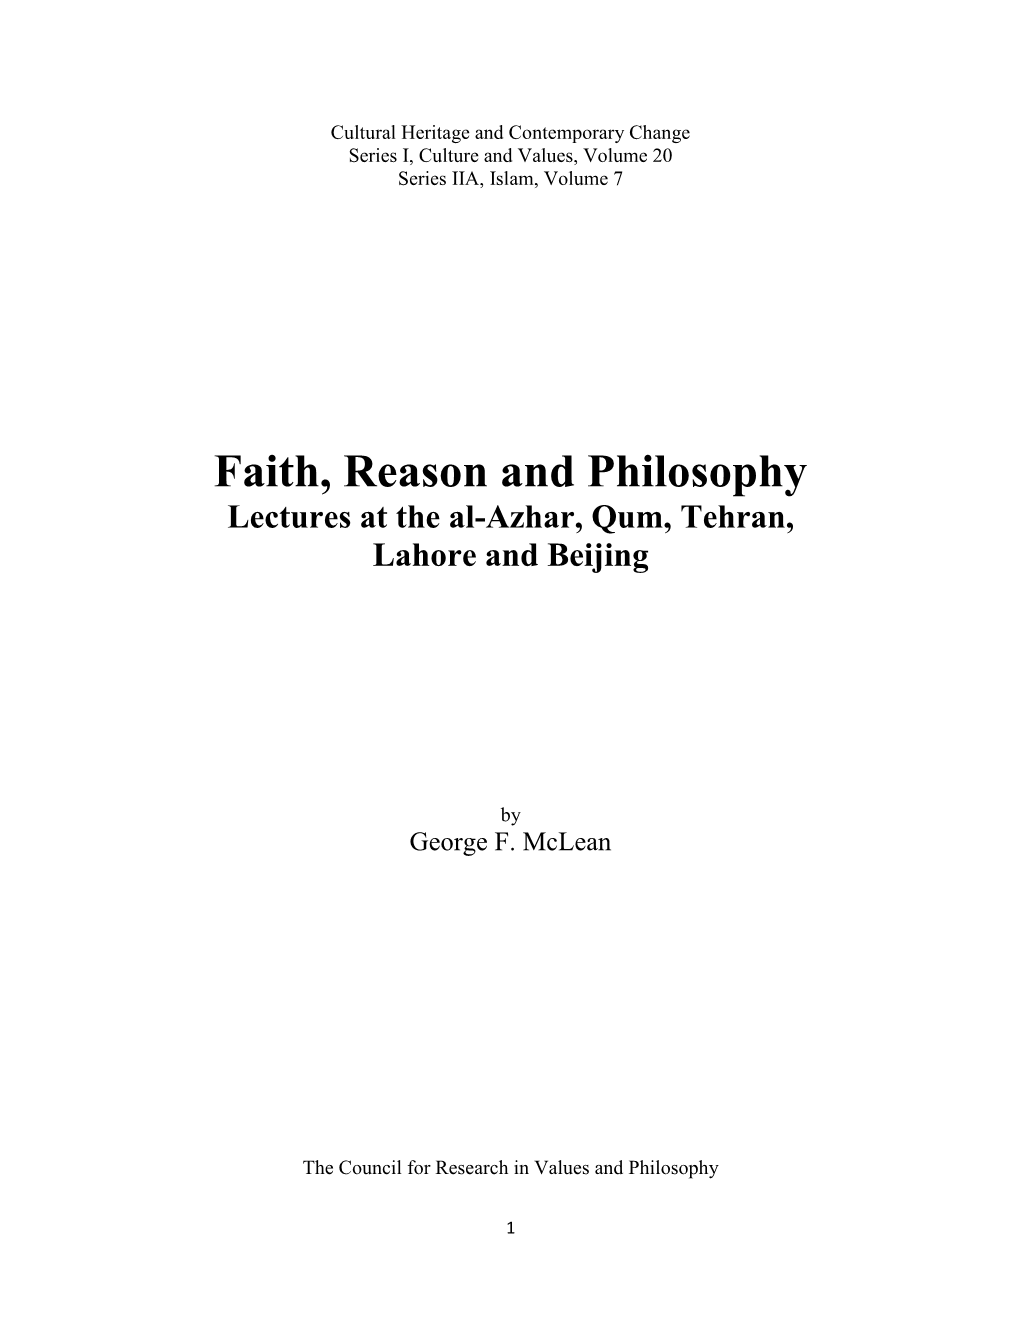 Faith, Reason and Philosophy Lectures at the Al-Azhar, Qum, Tehran, Lahore and Beijing